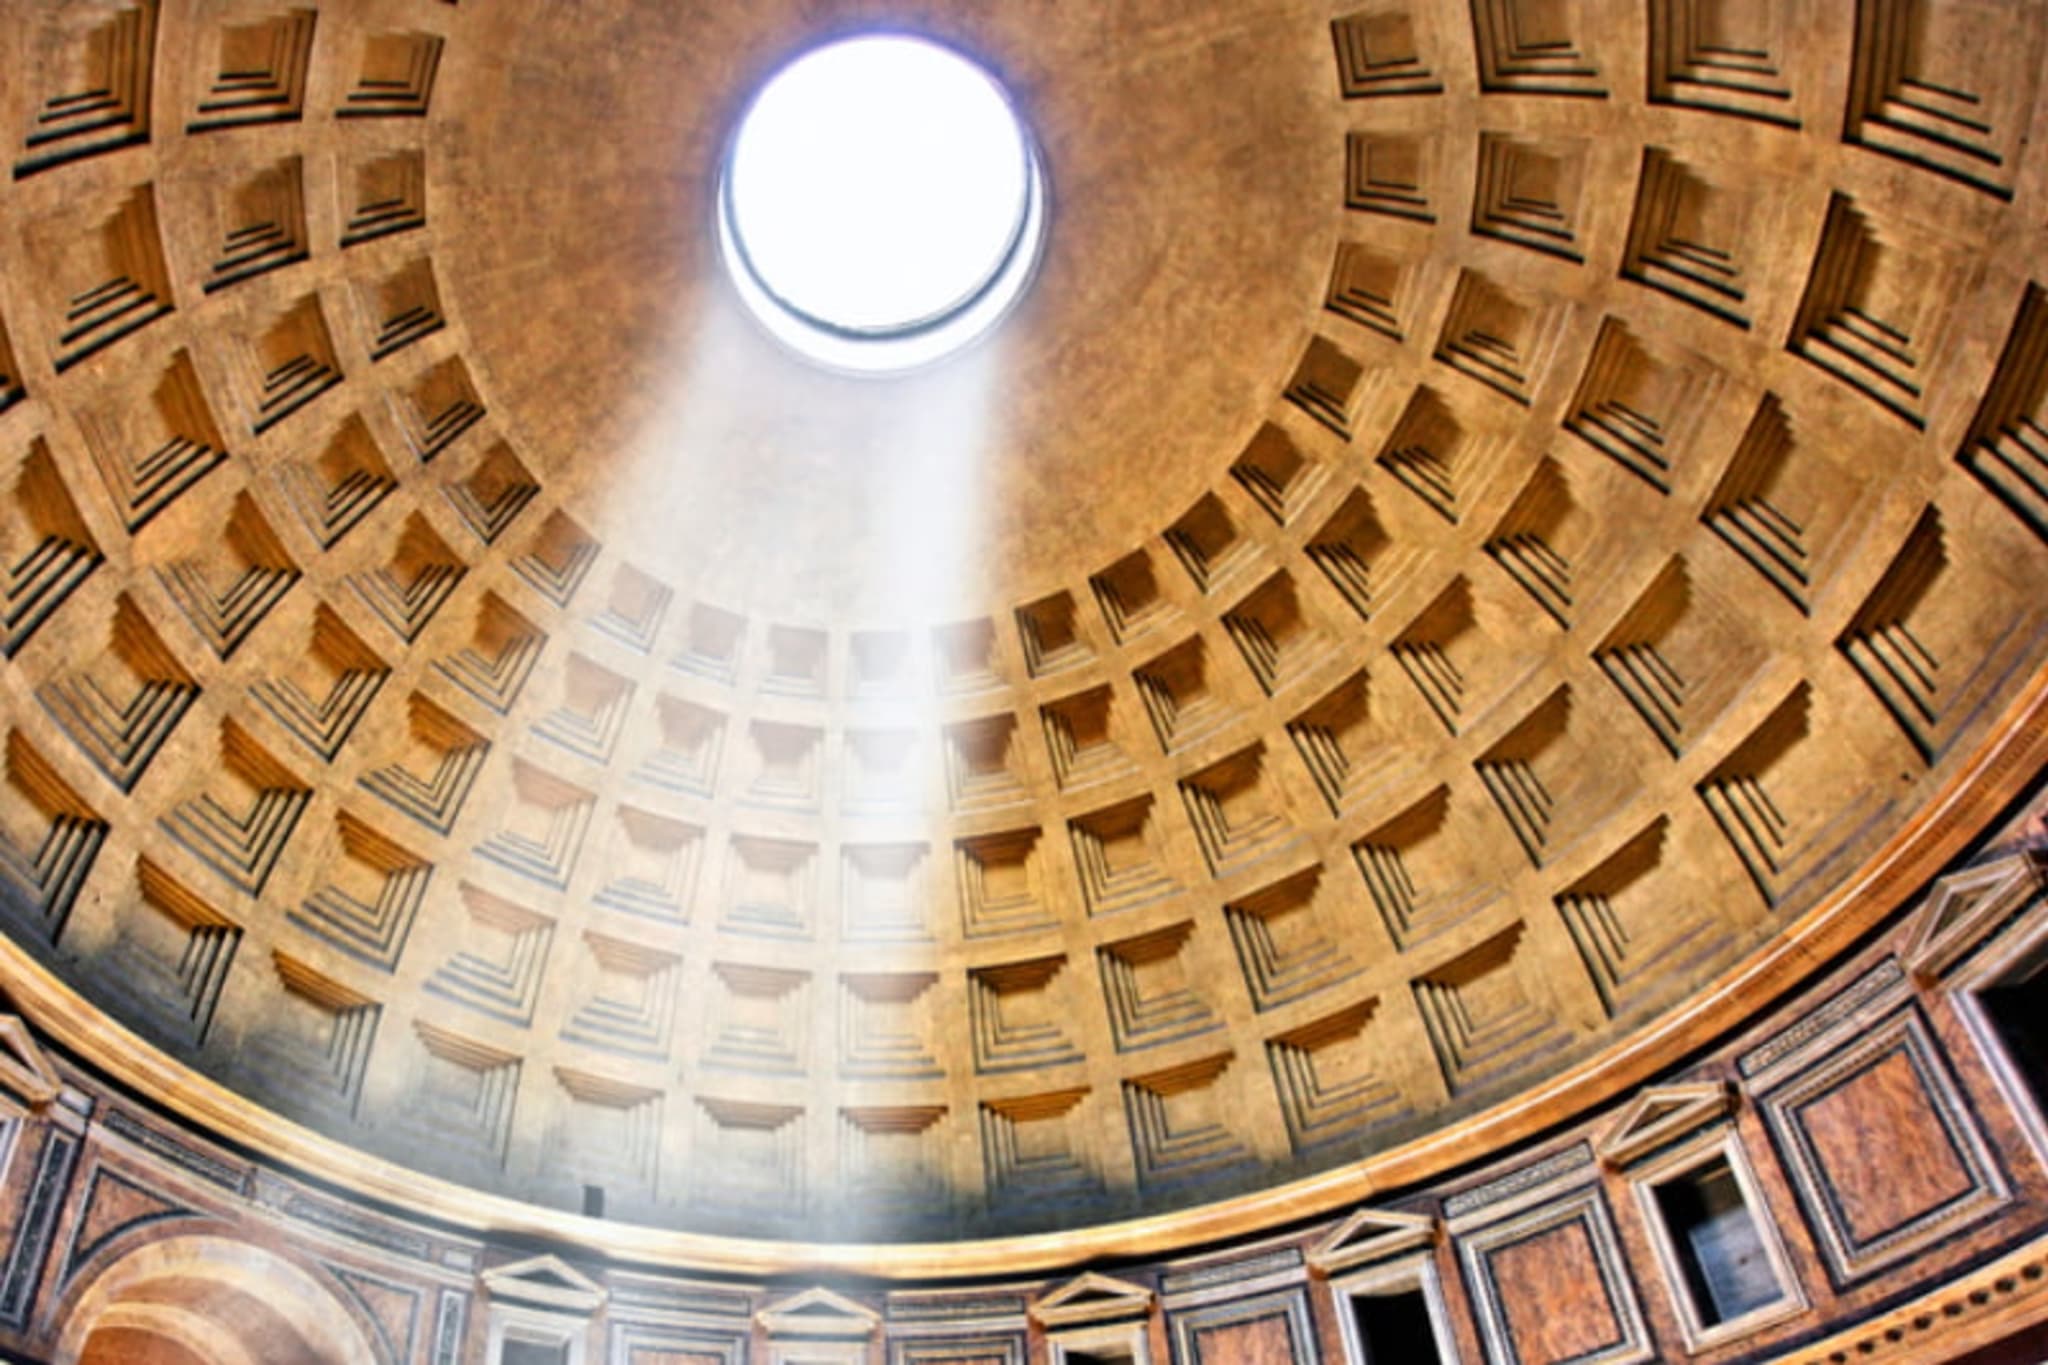 Light shining through the oculus in the roof of the Pantheon